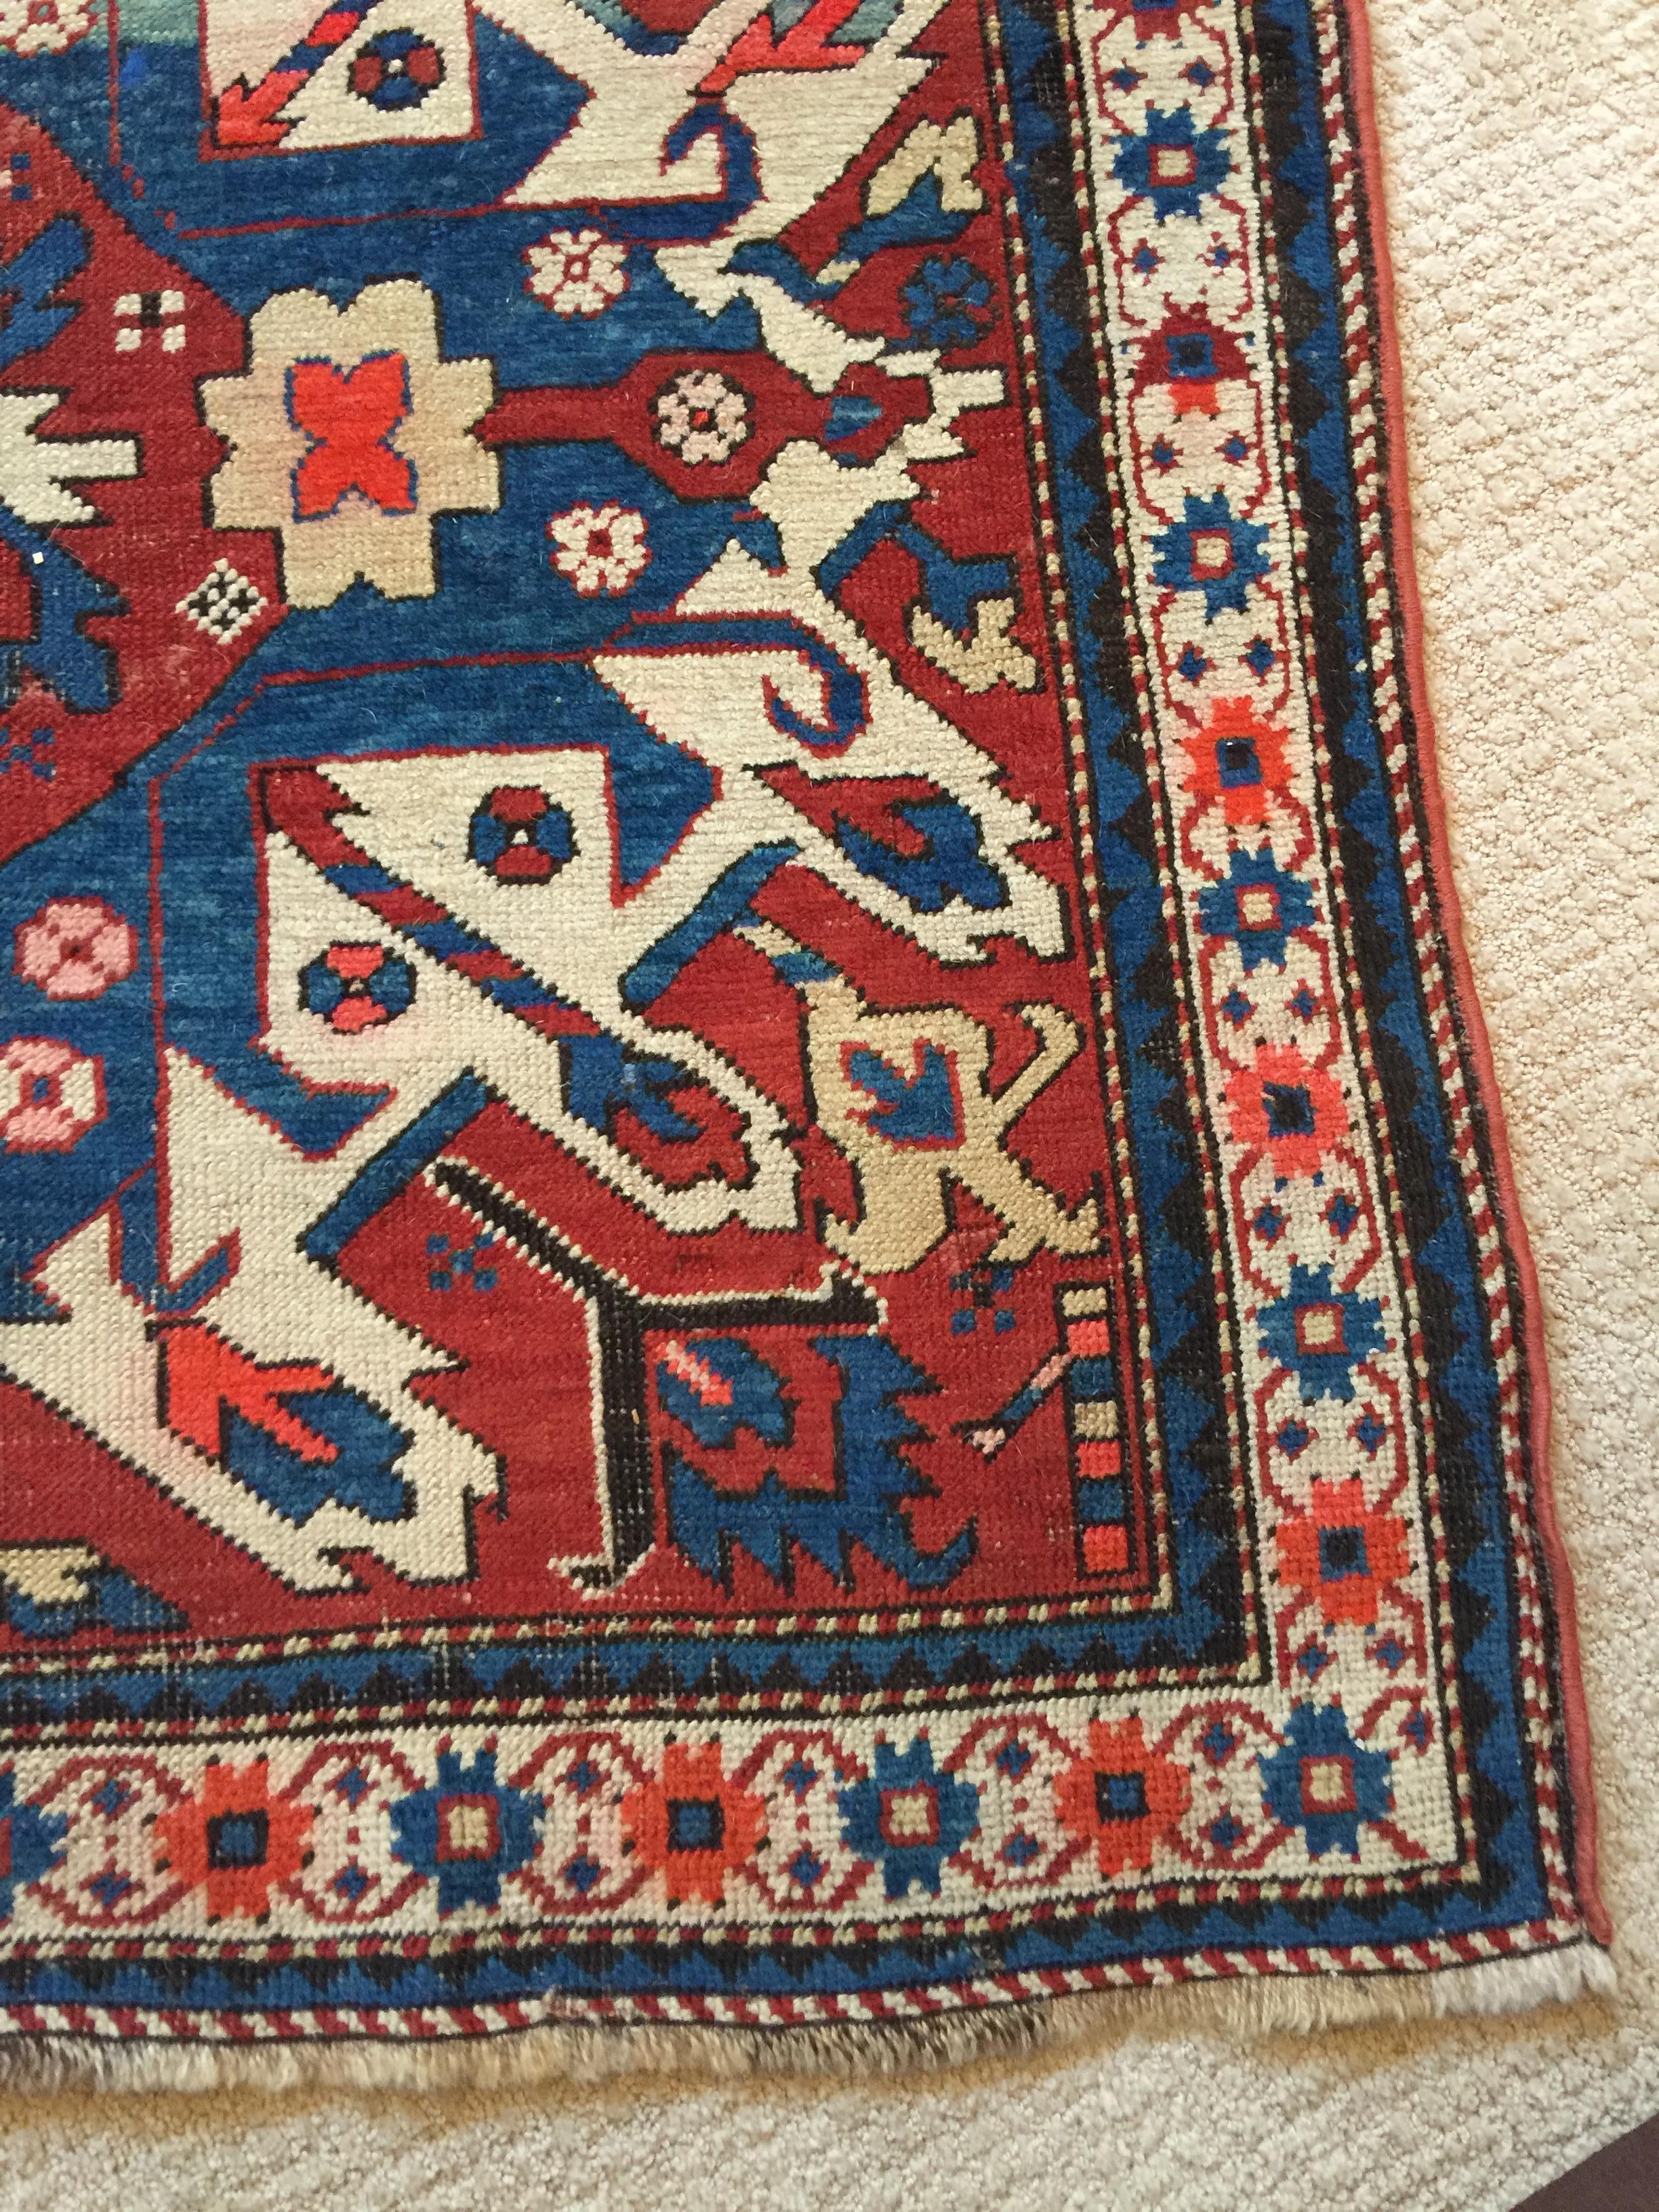 Antique Persian Rug: Late 19th Century Eagle Kazak Chelaberd Wool Rug Carpet In Good Condition For Sale In Jersey City, NJ